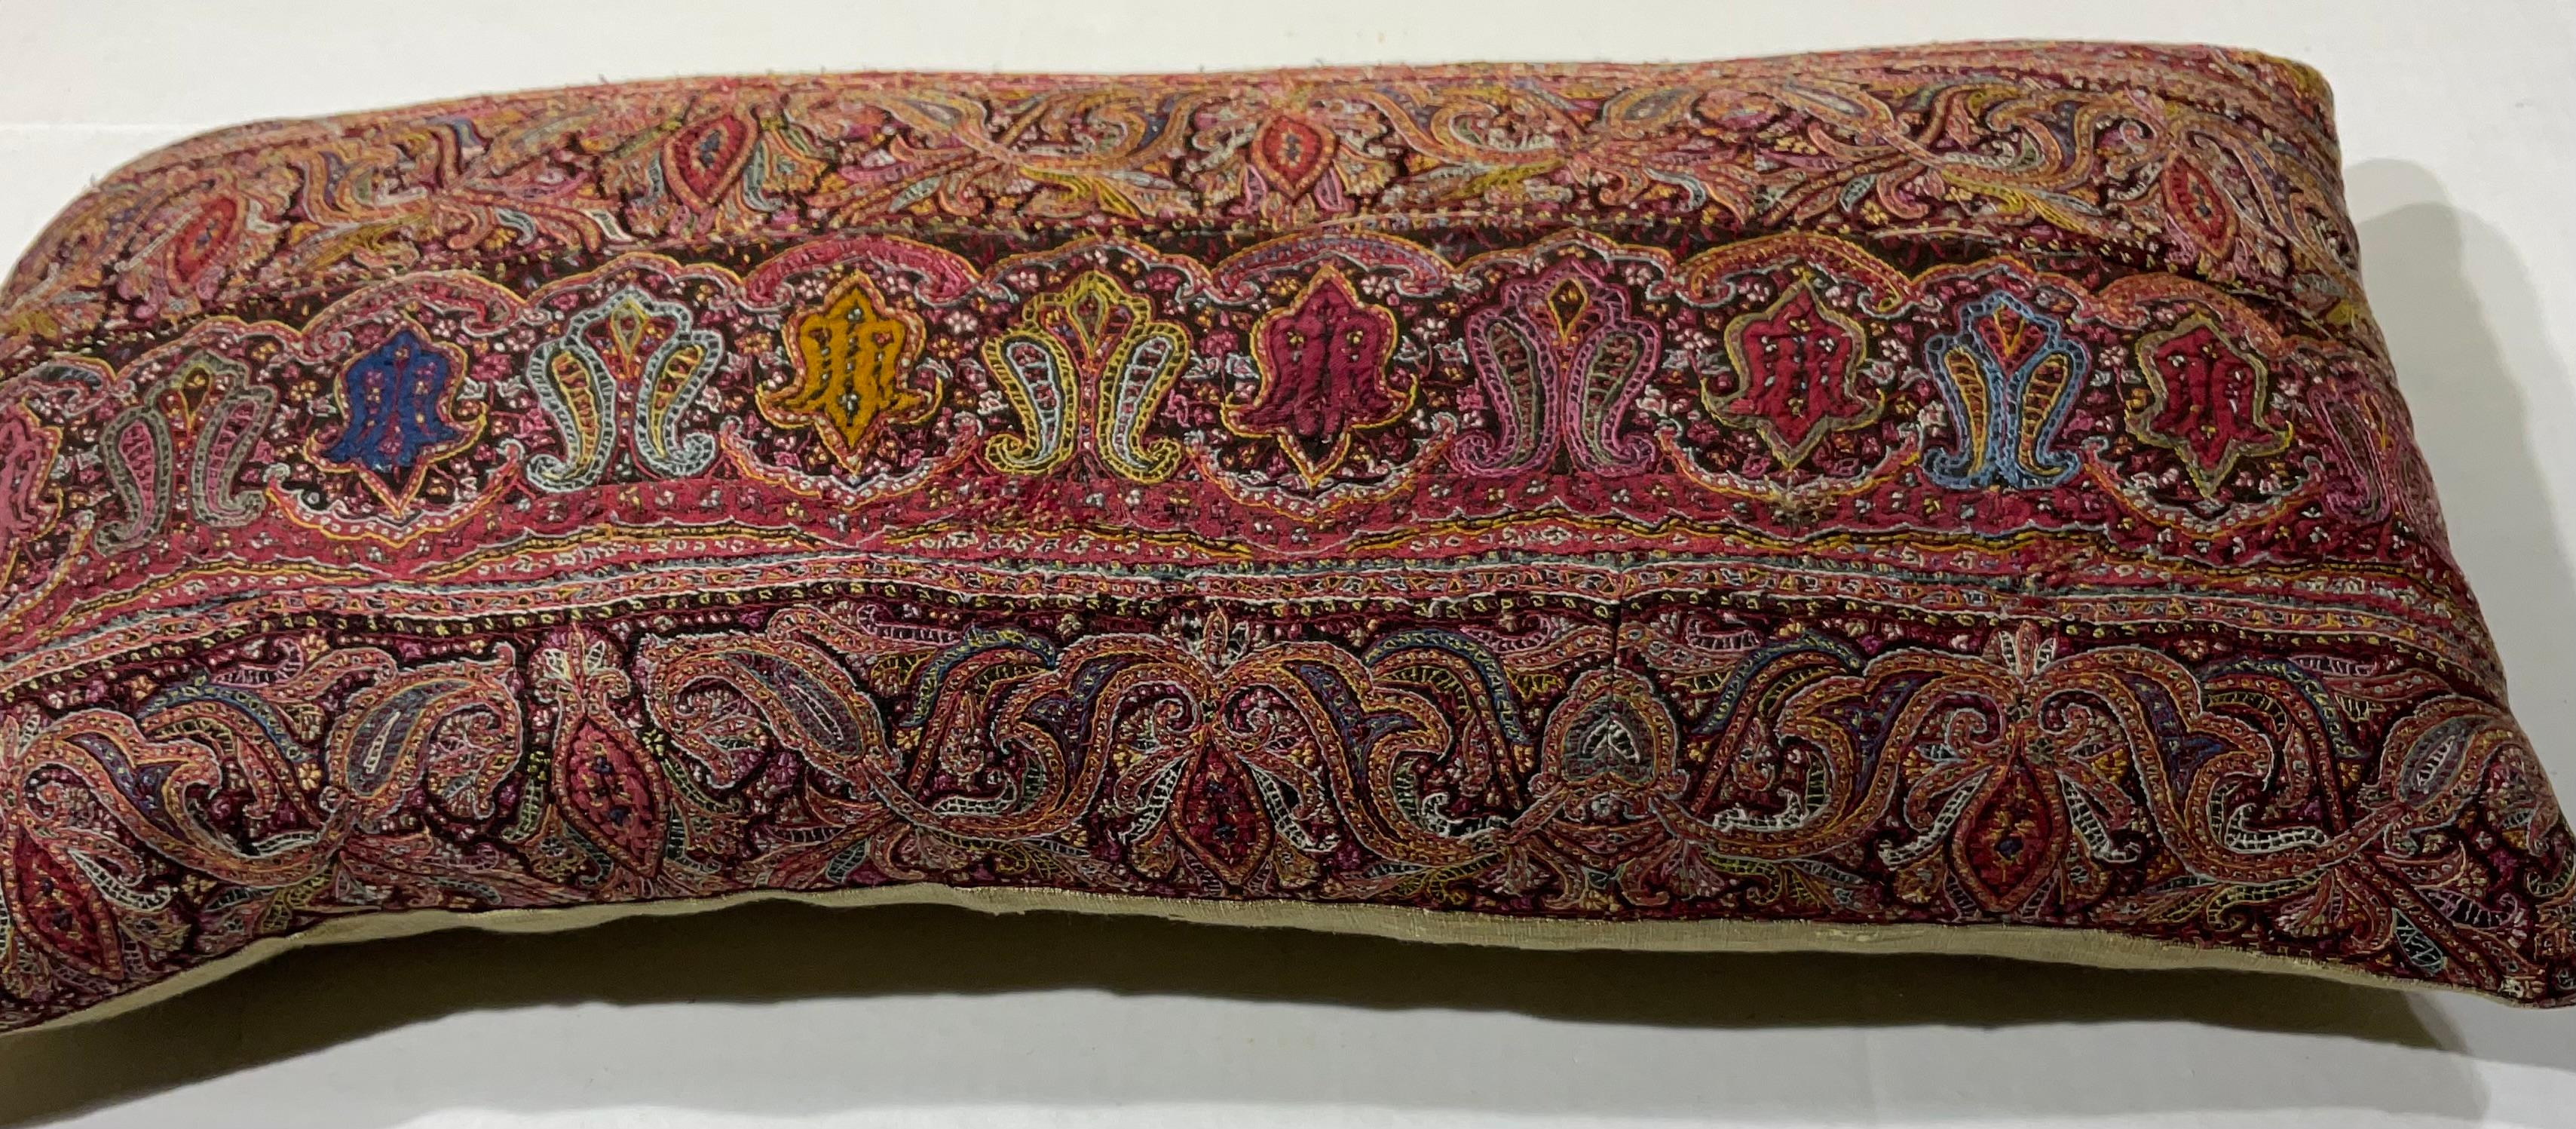 Single Hand Embroidery Persian Suzani Pillow For Sale 1